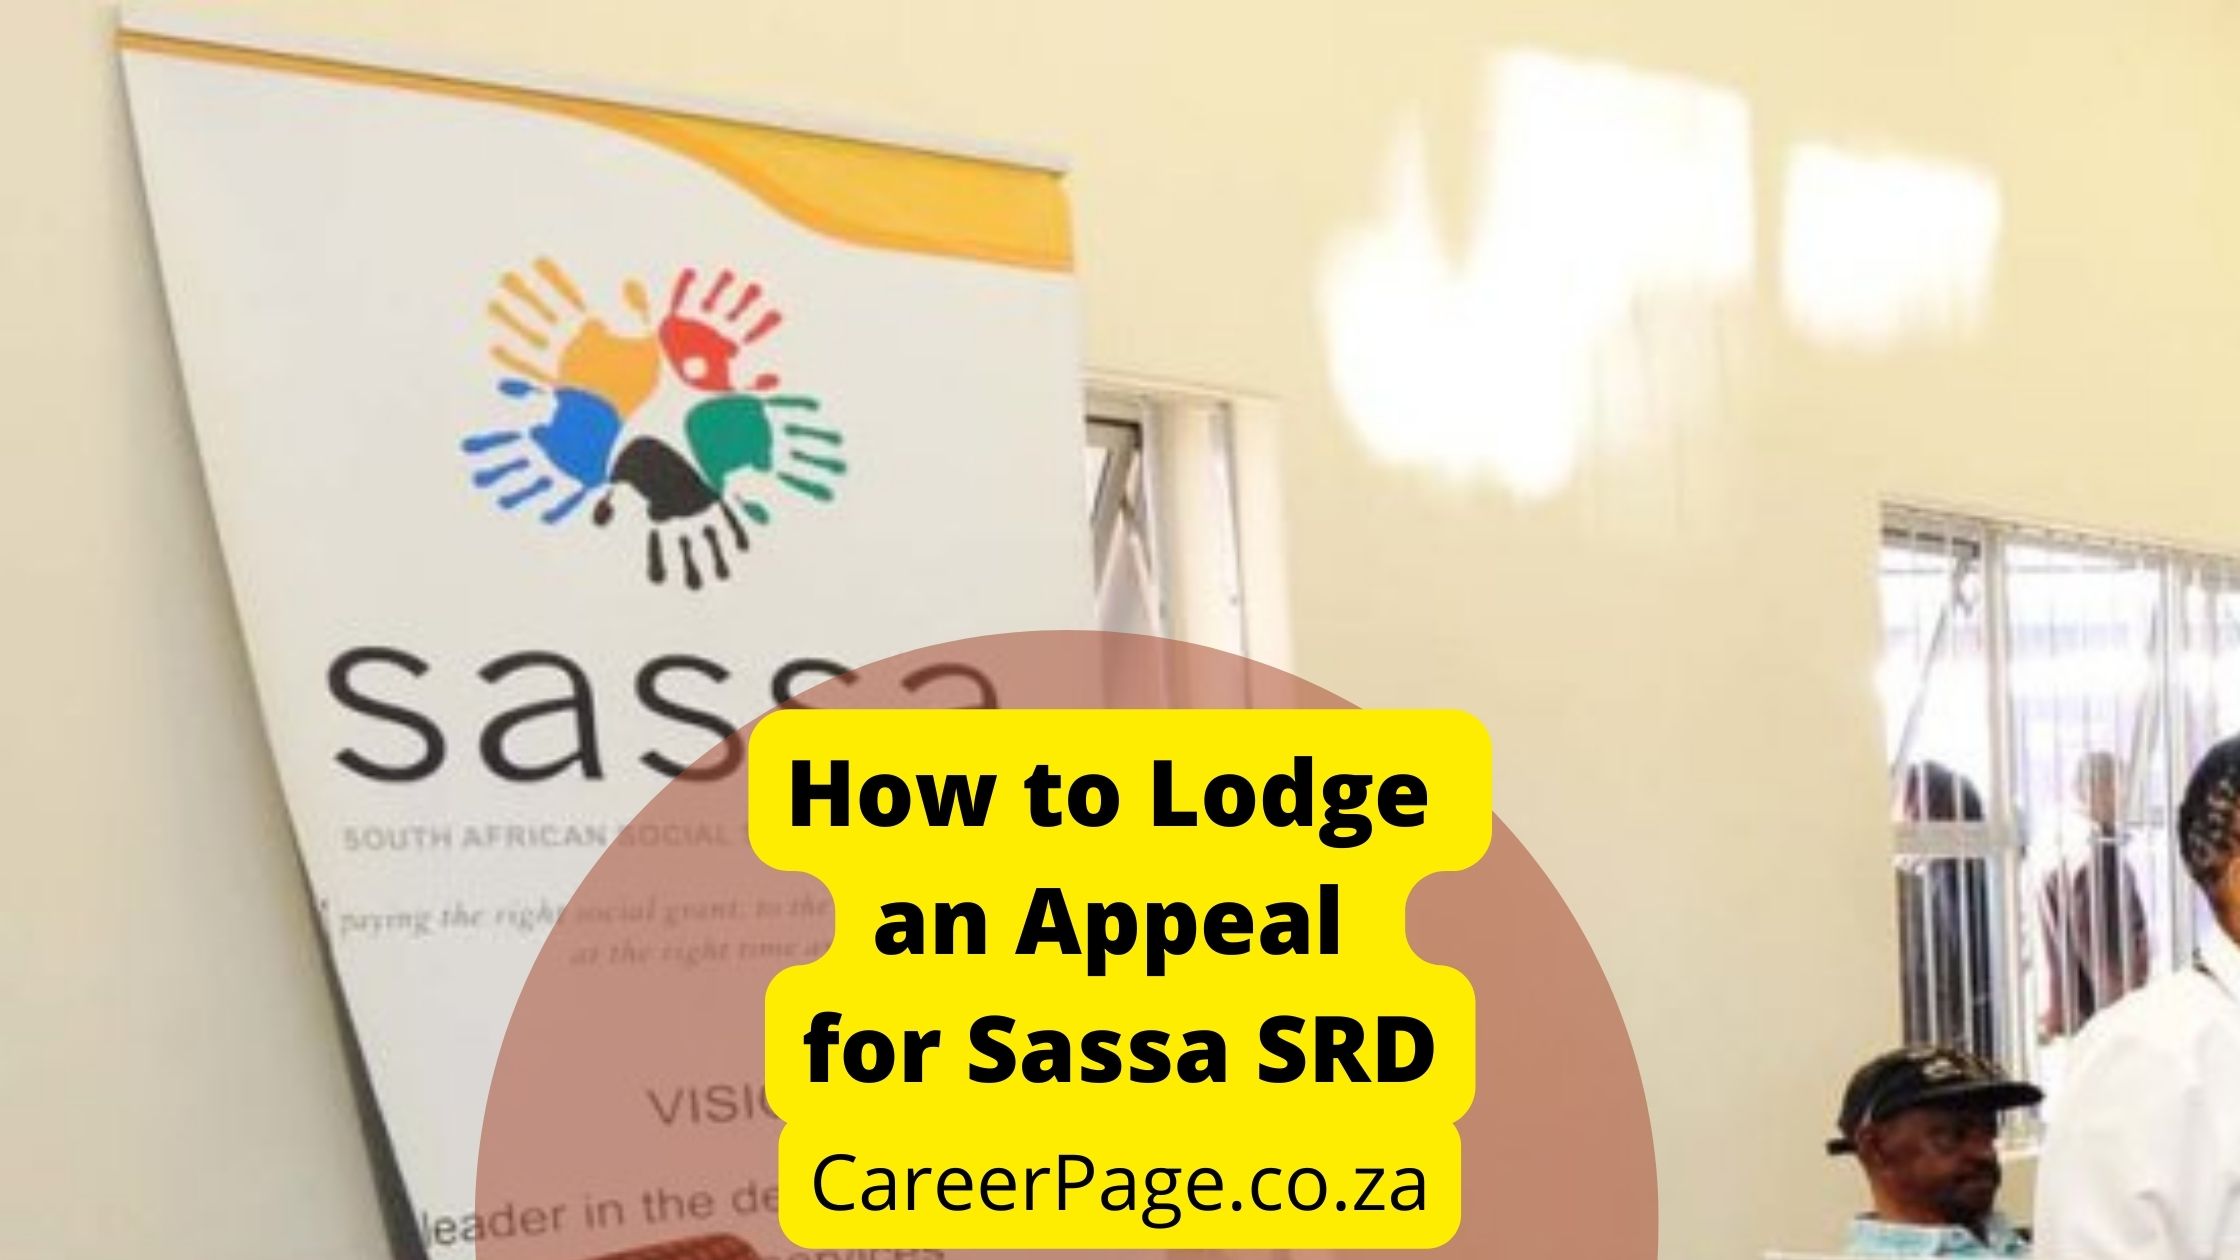 How to Lodge an Appeal for Sassa SRD Declined